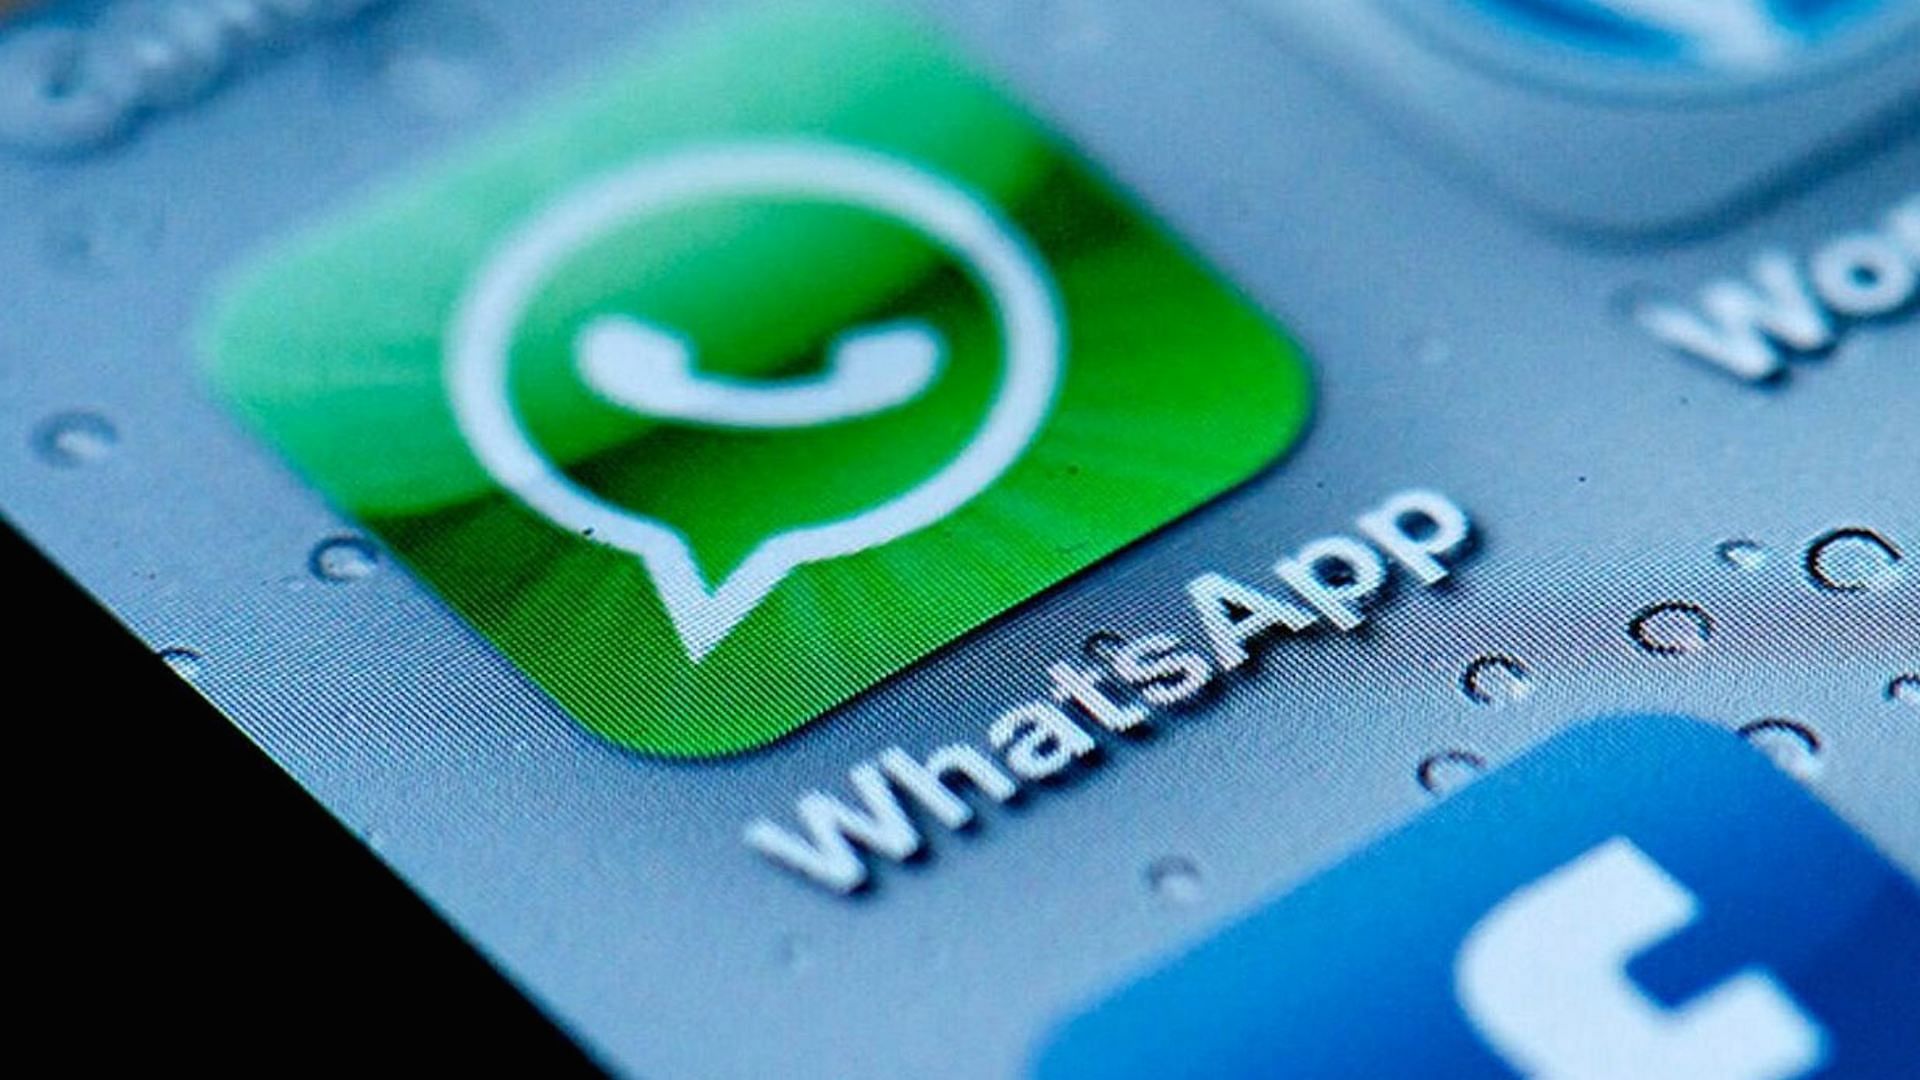 The top court has also sought WhatsApp and Facebook’s responses in the matter. (Photo: iStock)